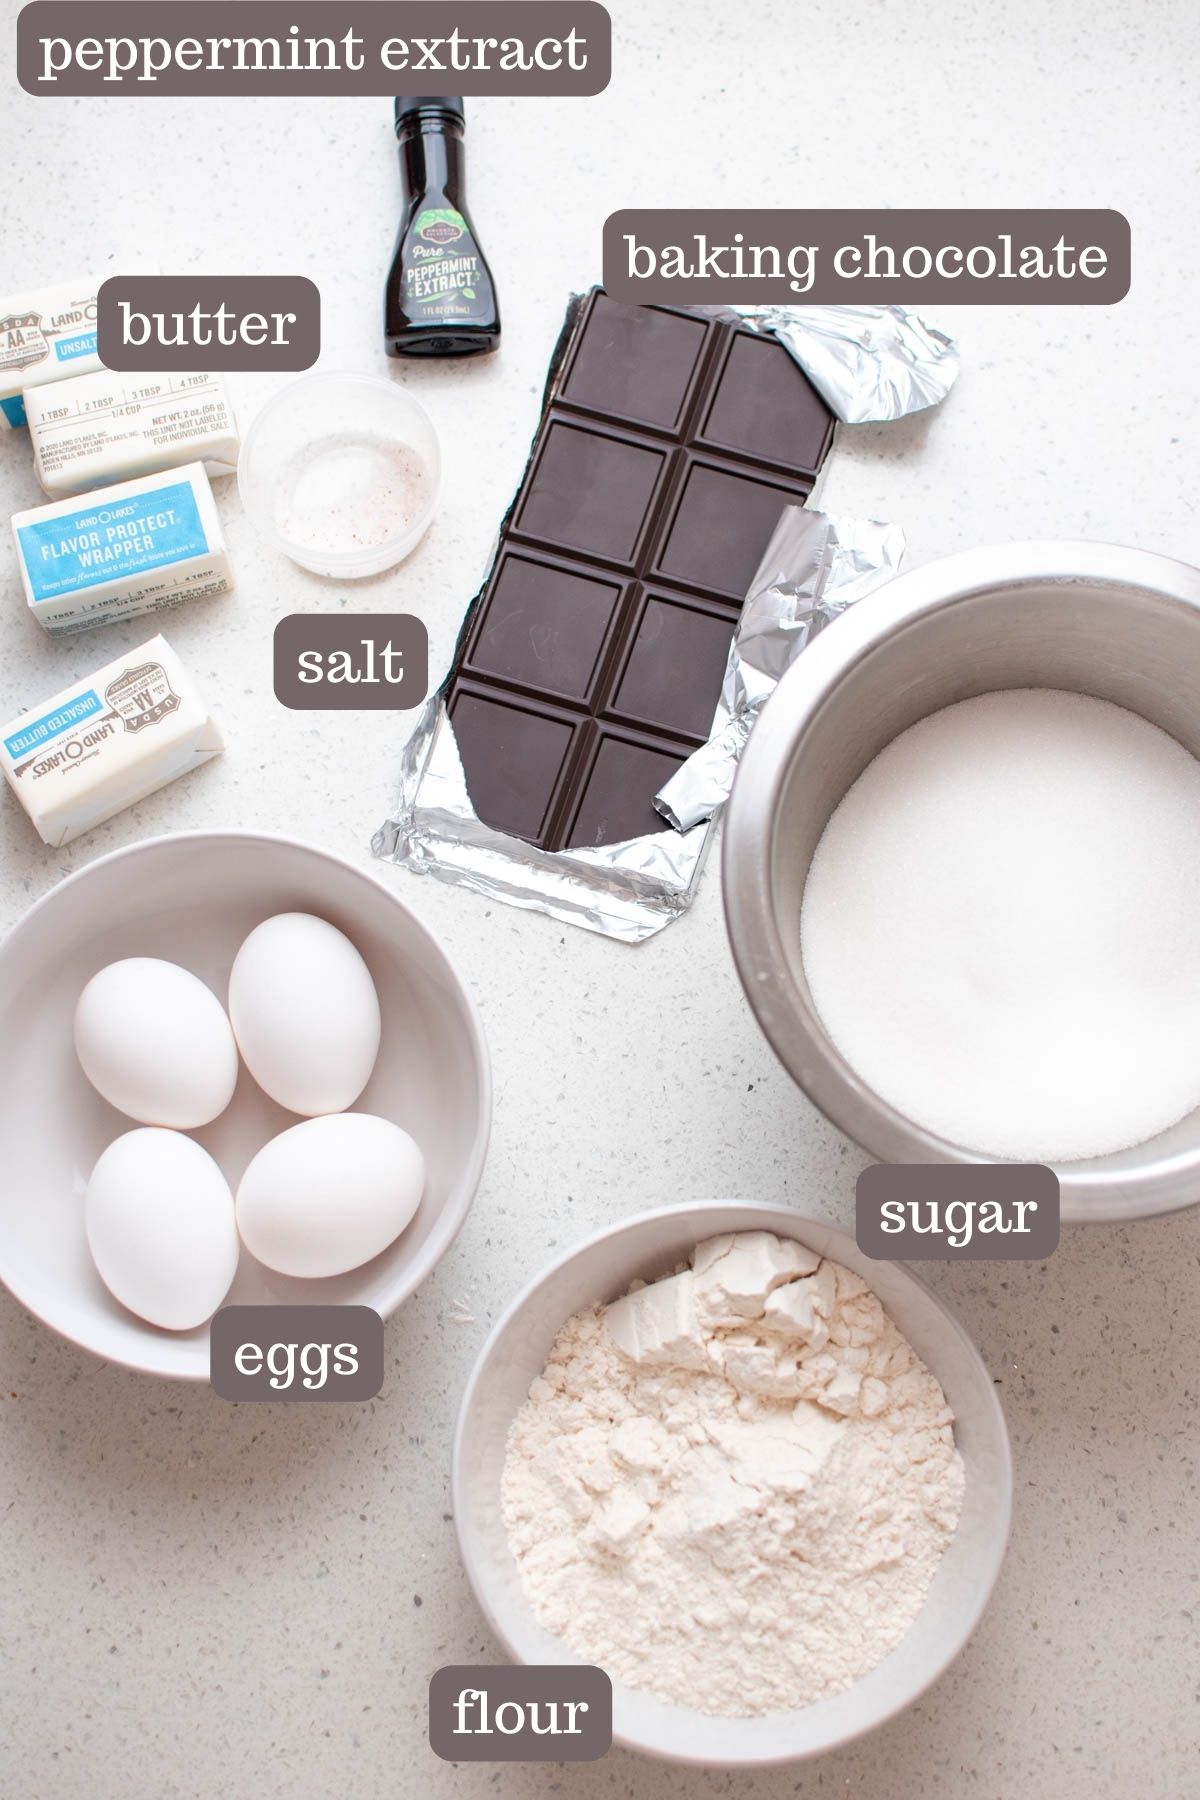 Labeled mint brownie ingredients on counter including eggs, sugar, and flour.